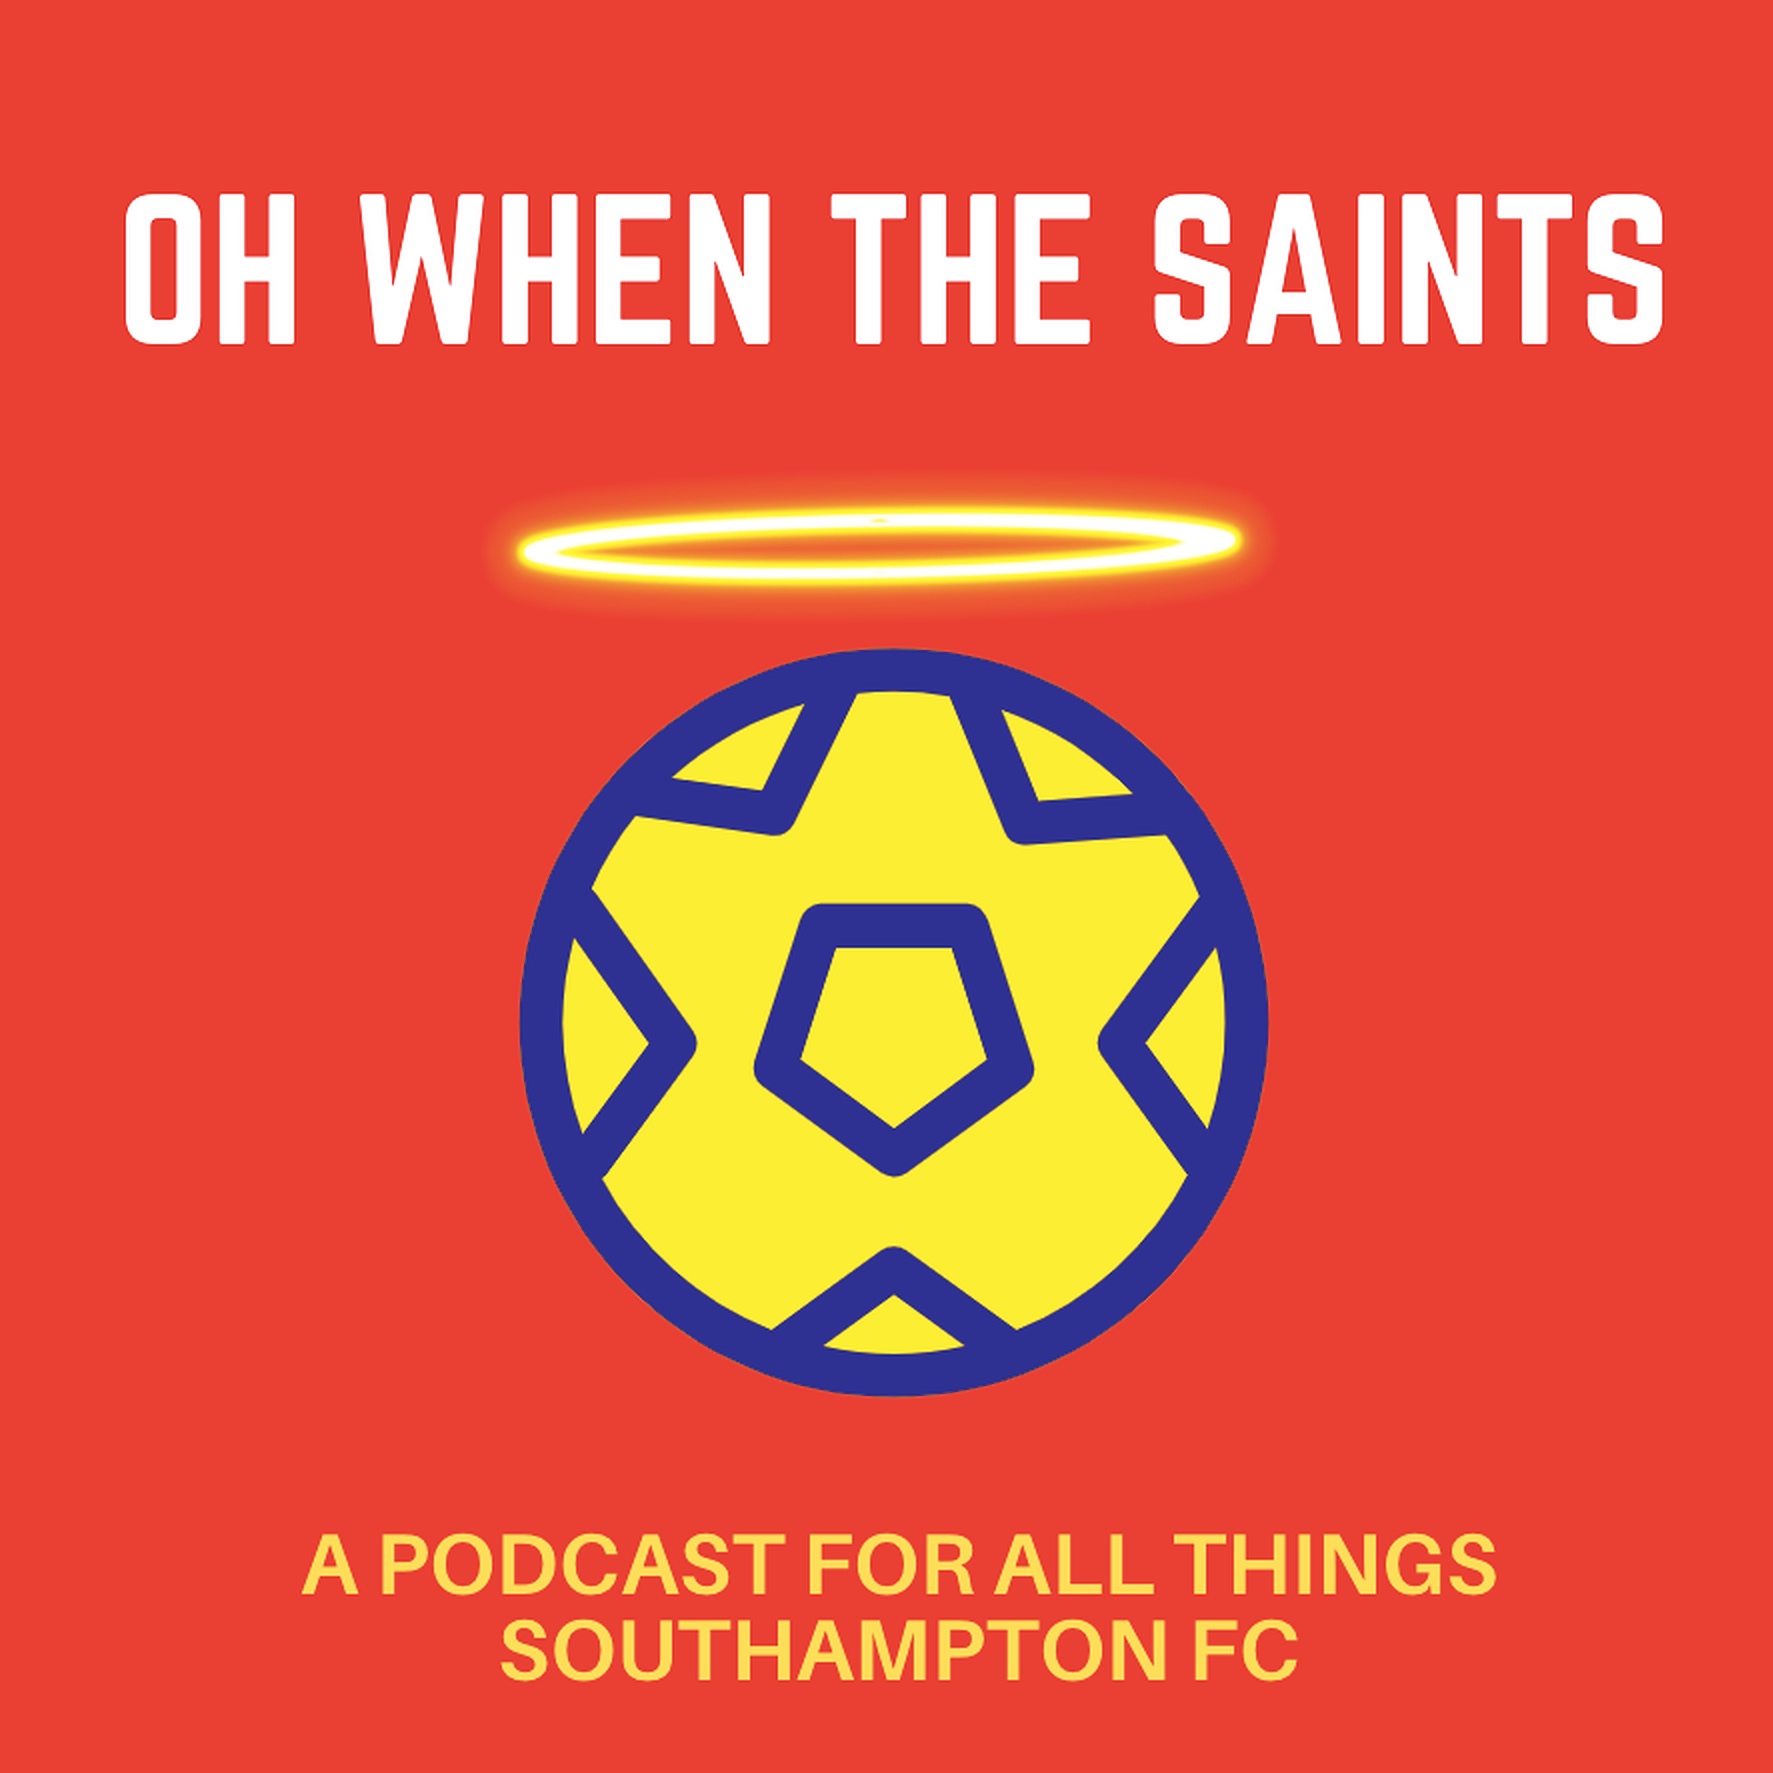 Artwork for podcast Oh When The Saints